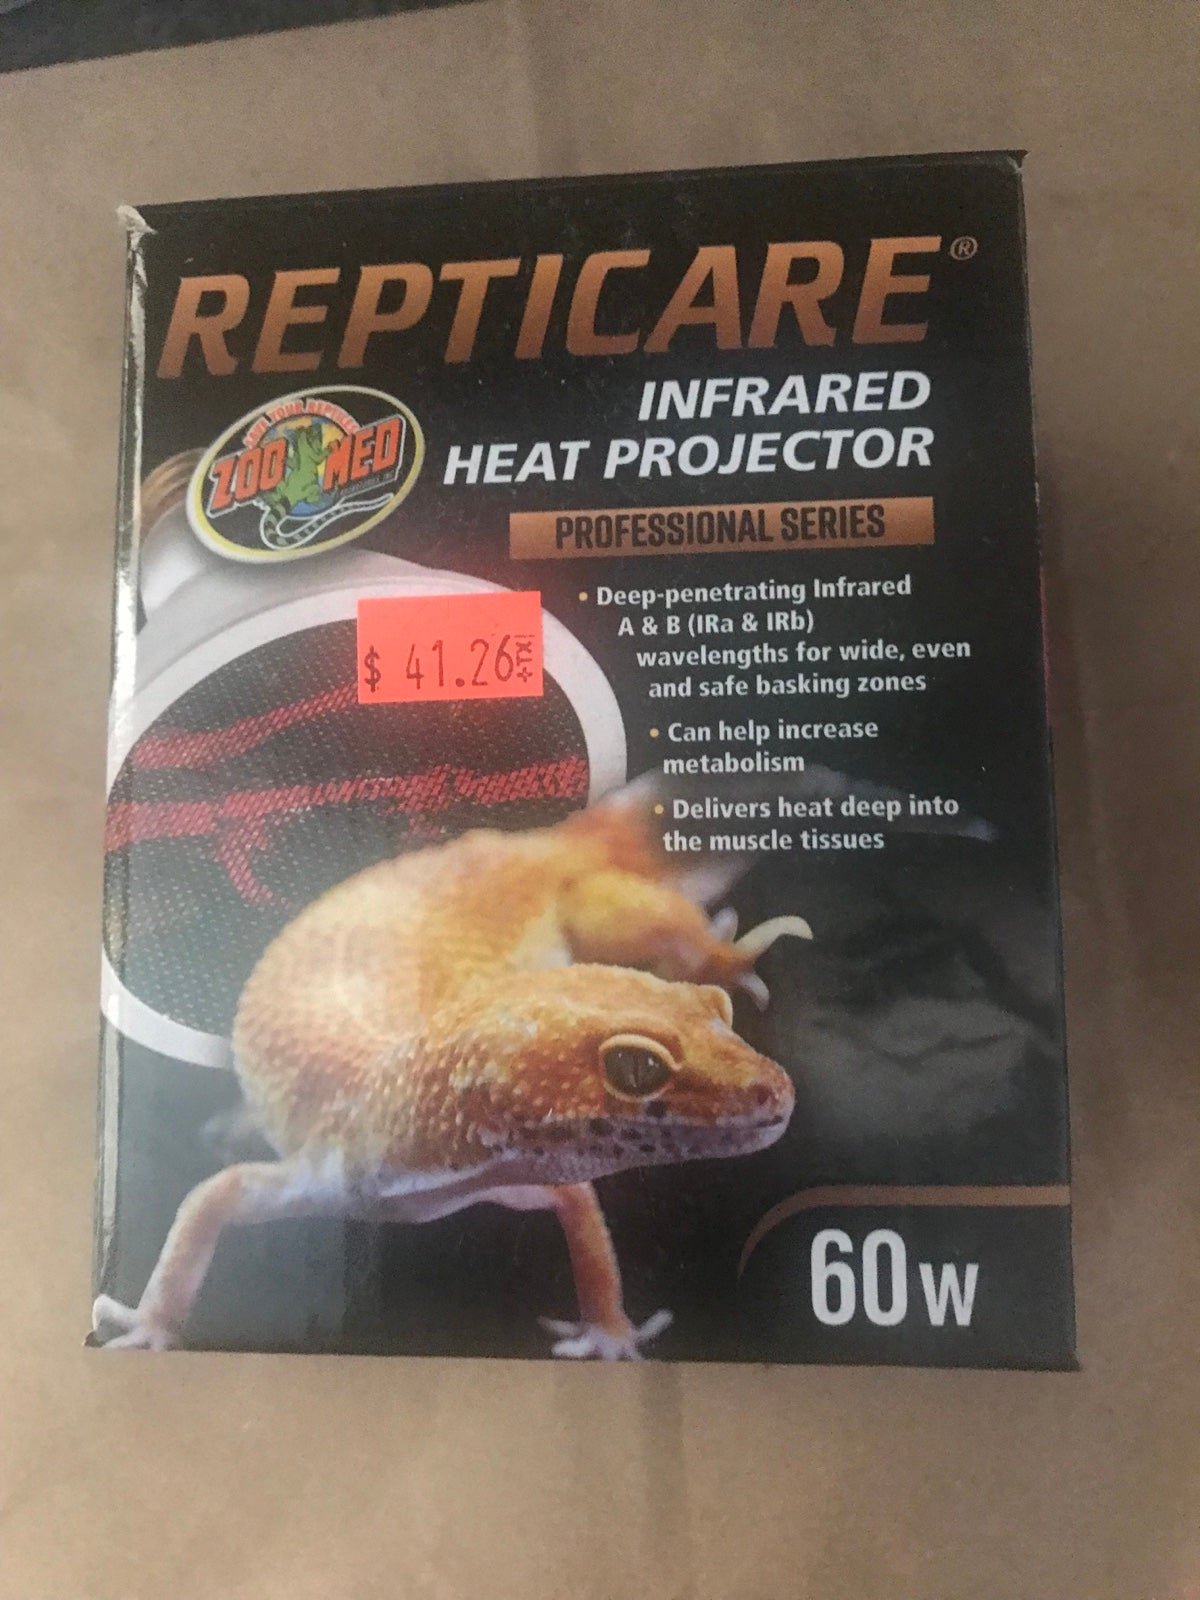 Heat projector  for reptiles 37ifnfWKd